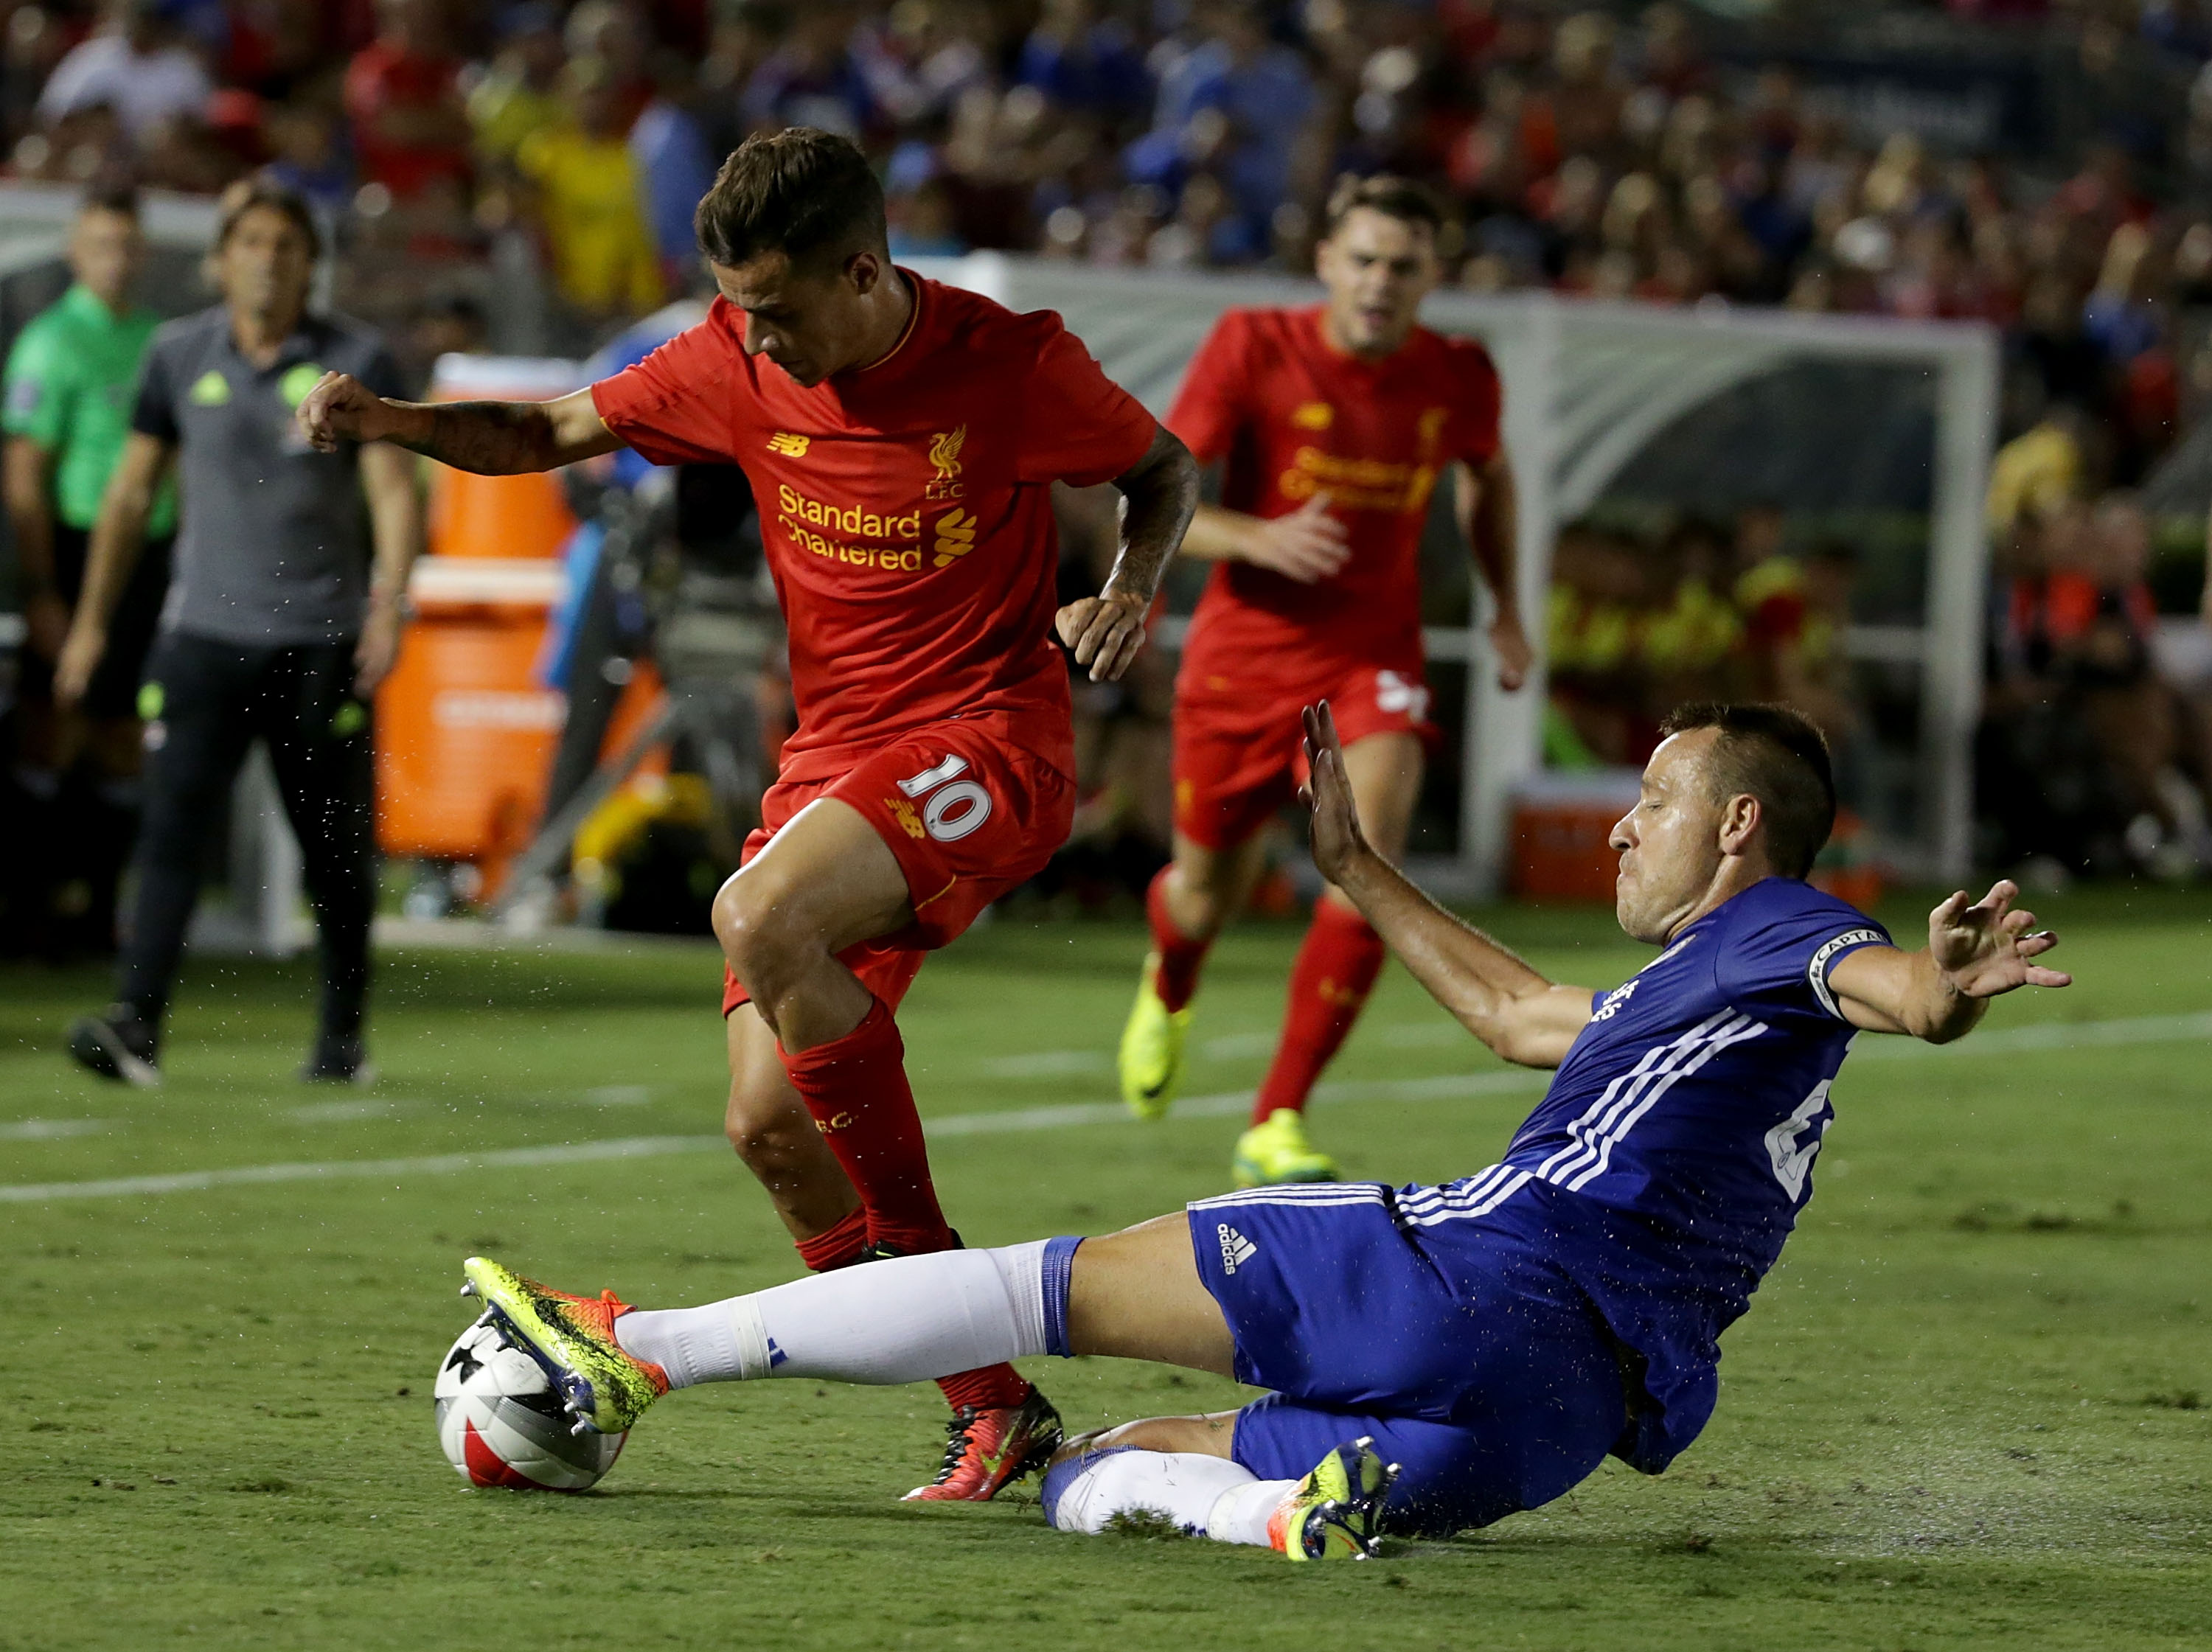 PASADENA, CA - JULY 27:  Philippe Coutinho #10 of Liverpool is tackled by John Terry #26 of Chelsea in the first half during the 2016 International Champions Cup at the Rose Bowl on July 27, 2016 in Pasadena, California.  (Photo by Jeff Gross/Getty Images)